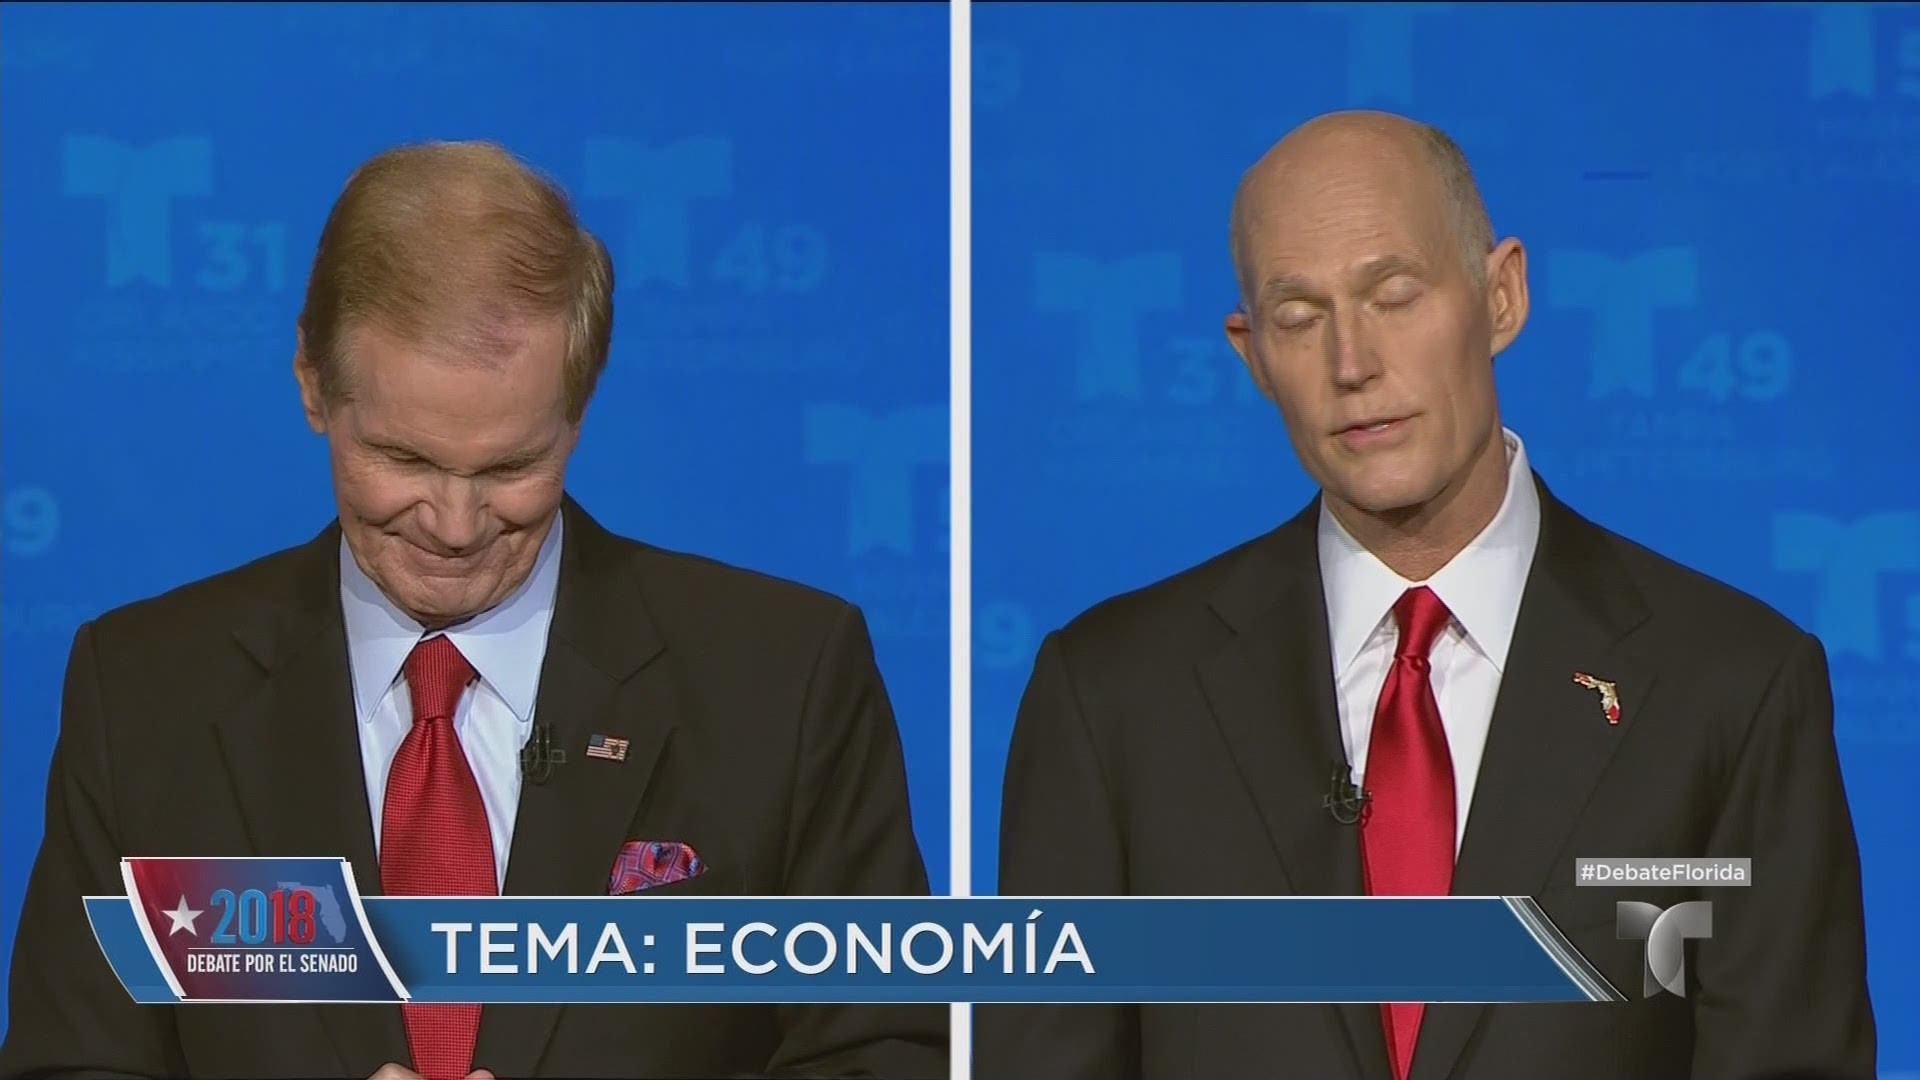 During Tuesday night's debate between Bill Nelson and Rick Scott, Scott said Nelson's policies cost 832,000 people their jobs.